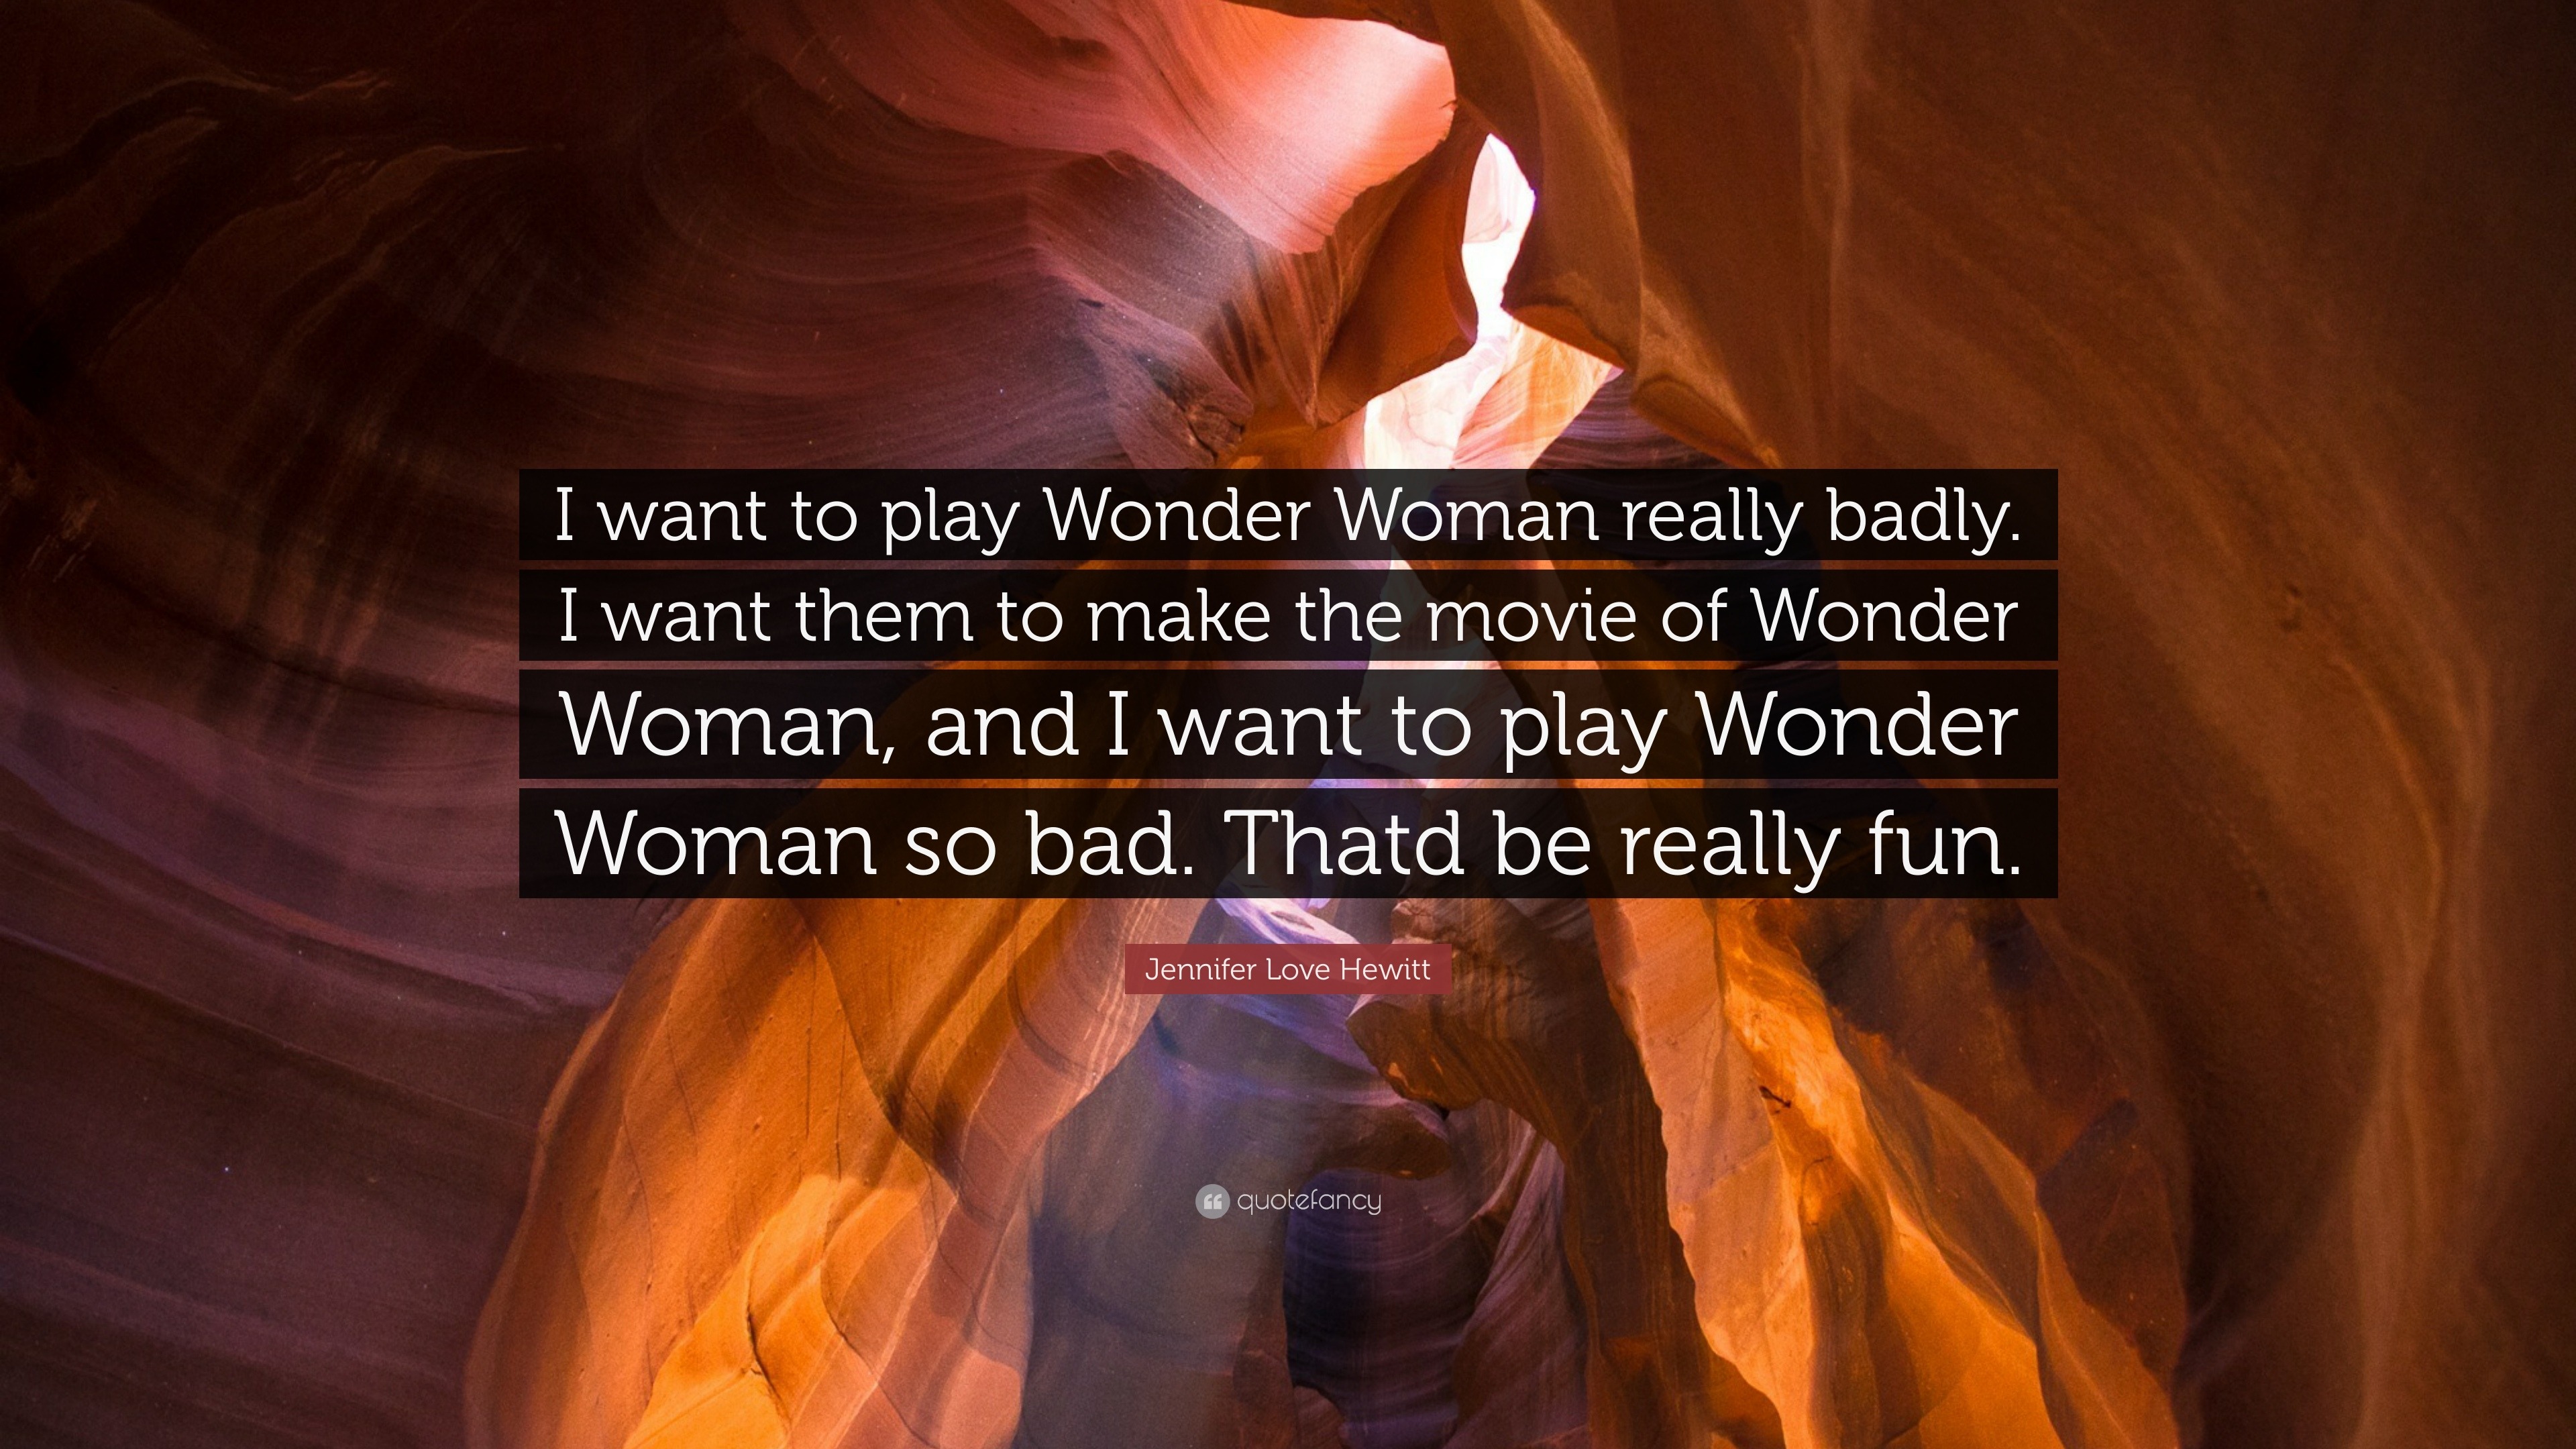 Jennifer Love Hewitt Quote I Want To Play Wonder Woman Really Badly I Want Them To Make The Movie Of Wonder Woman And I Want To Play Wonder Woman